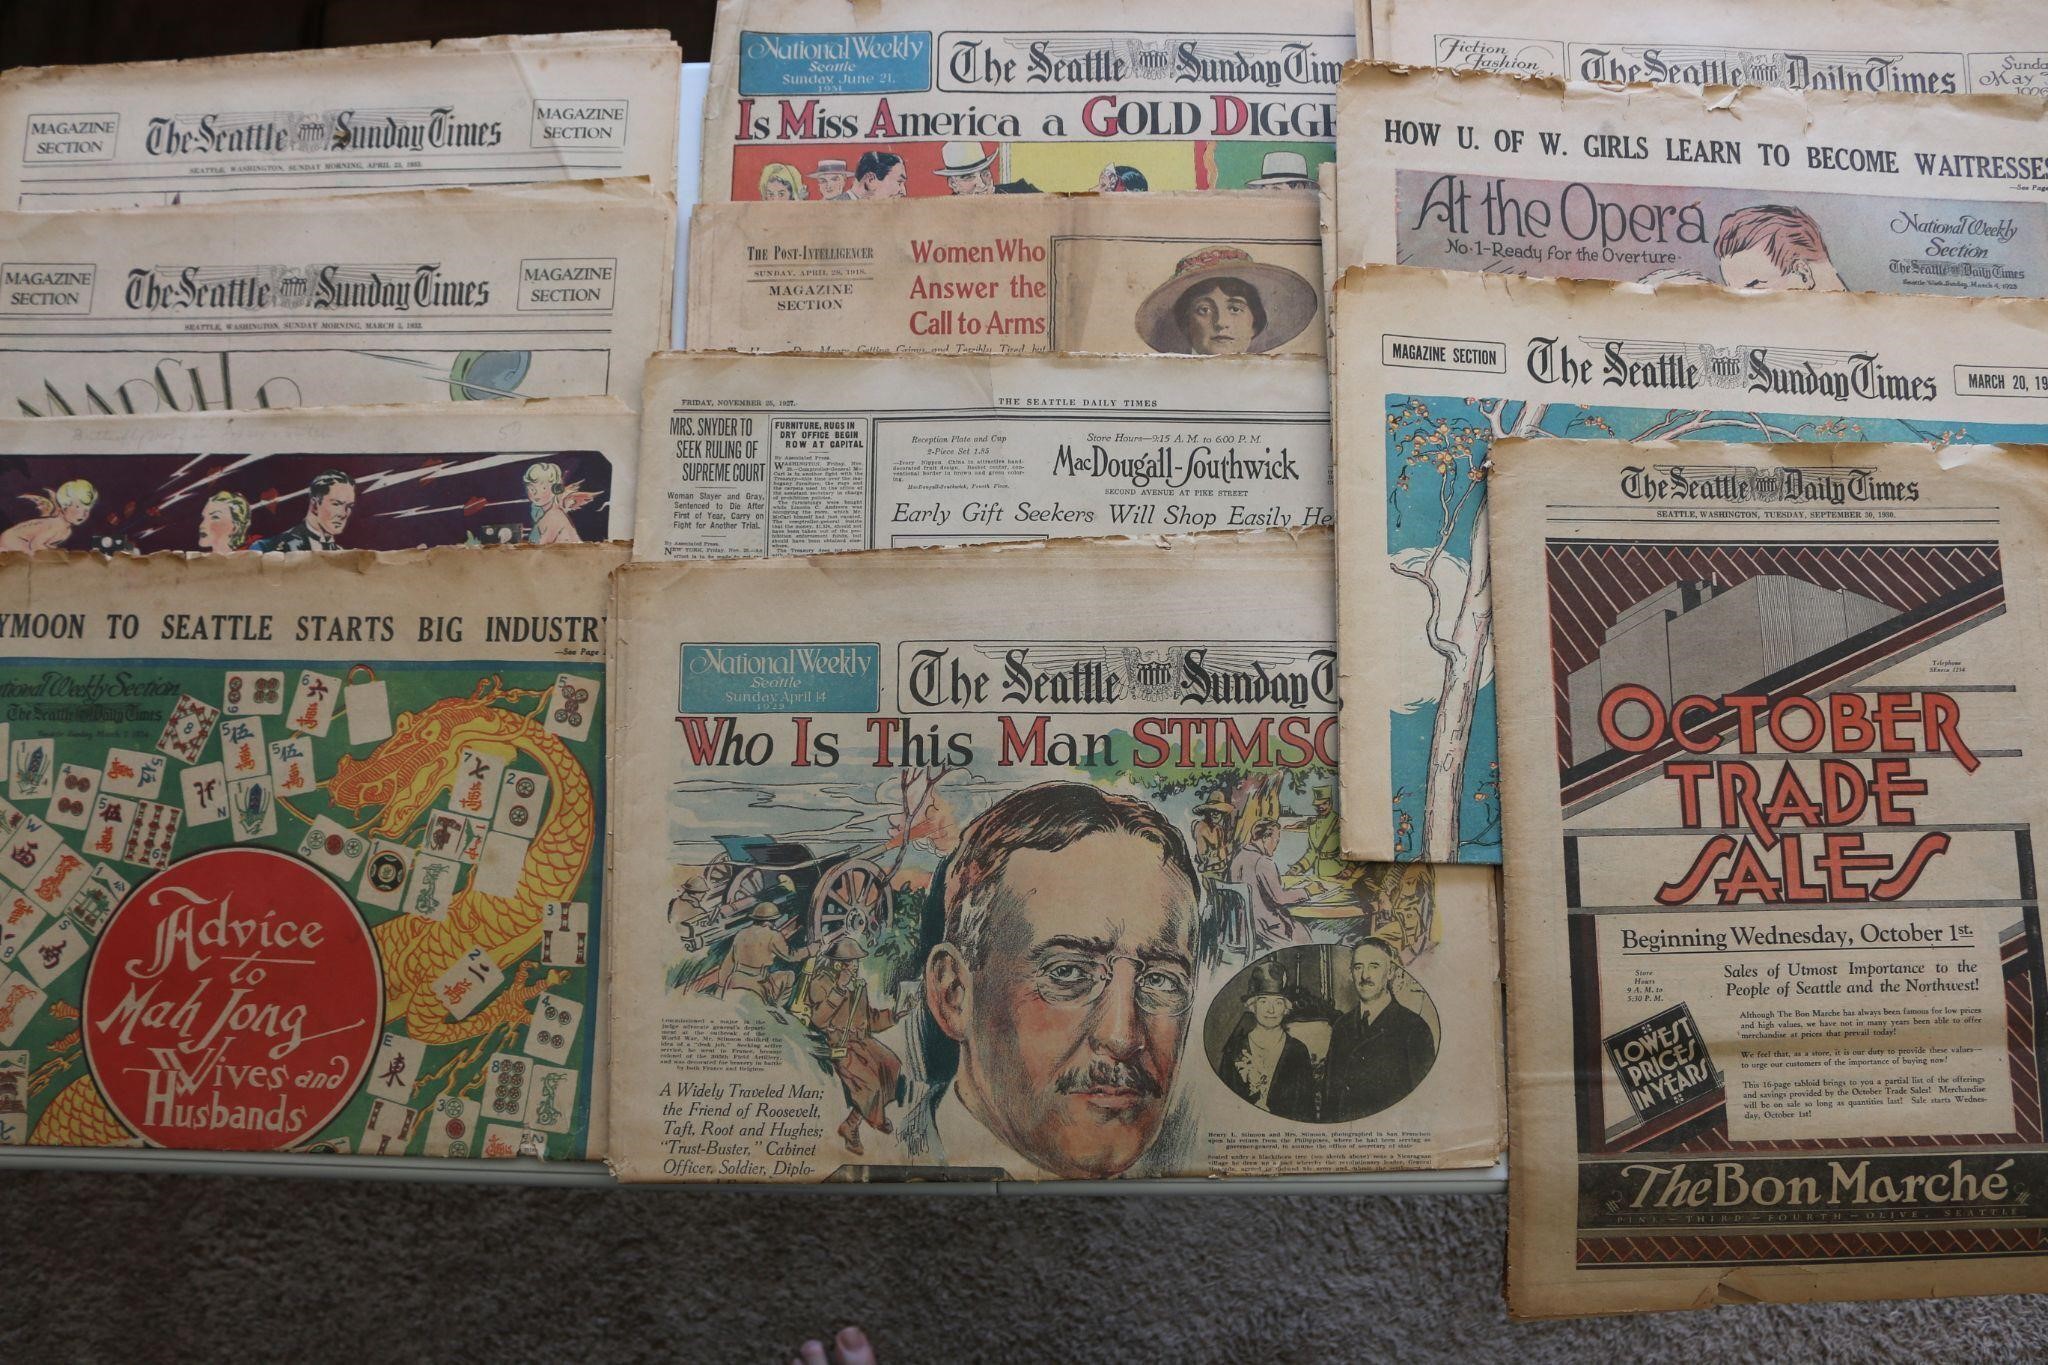 1920-1930 Seattle Newspaper Sections